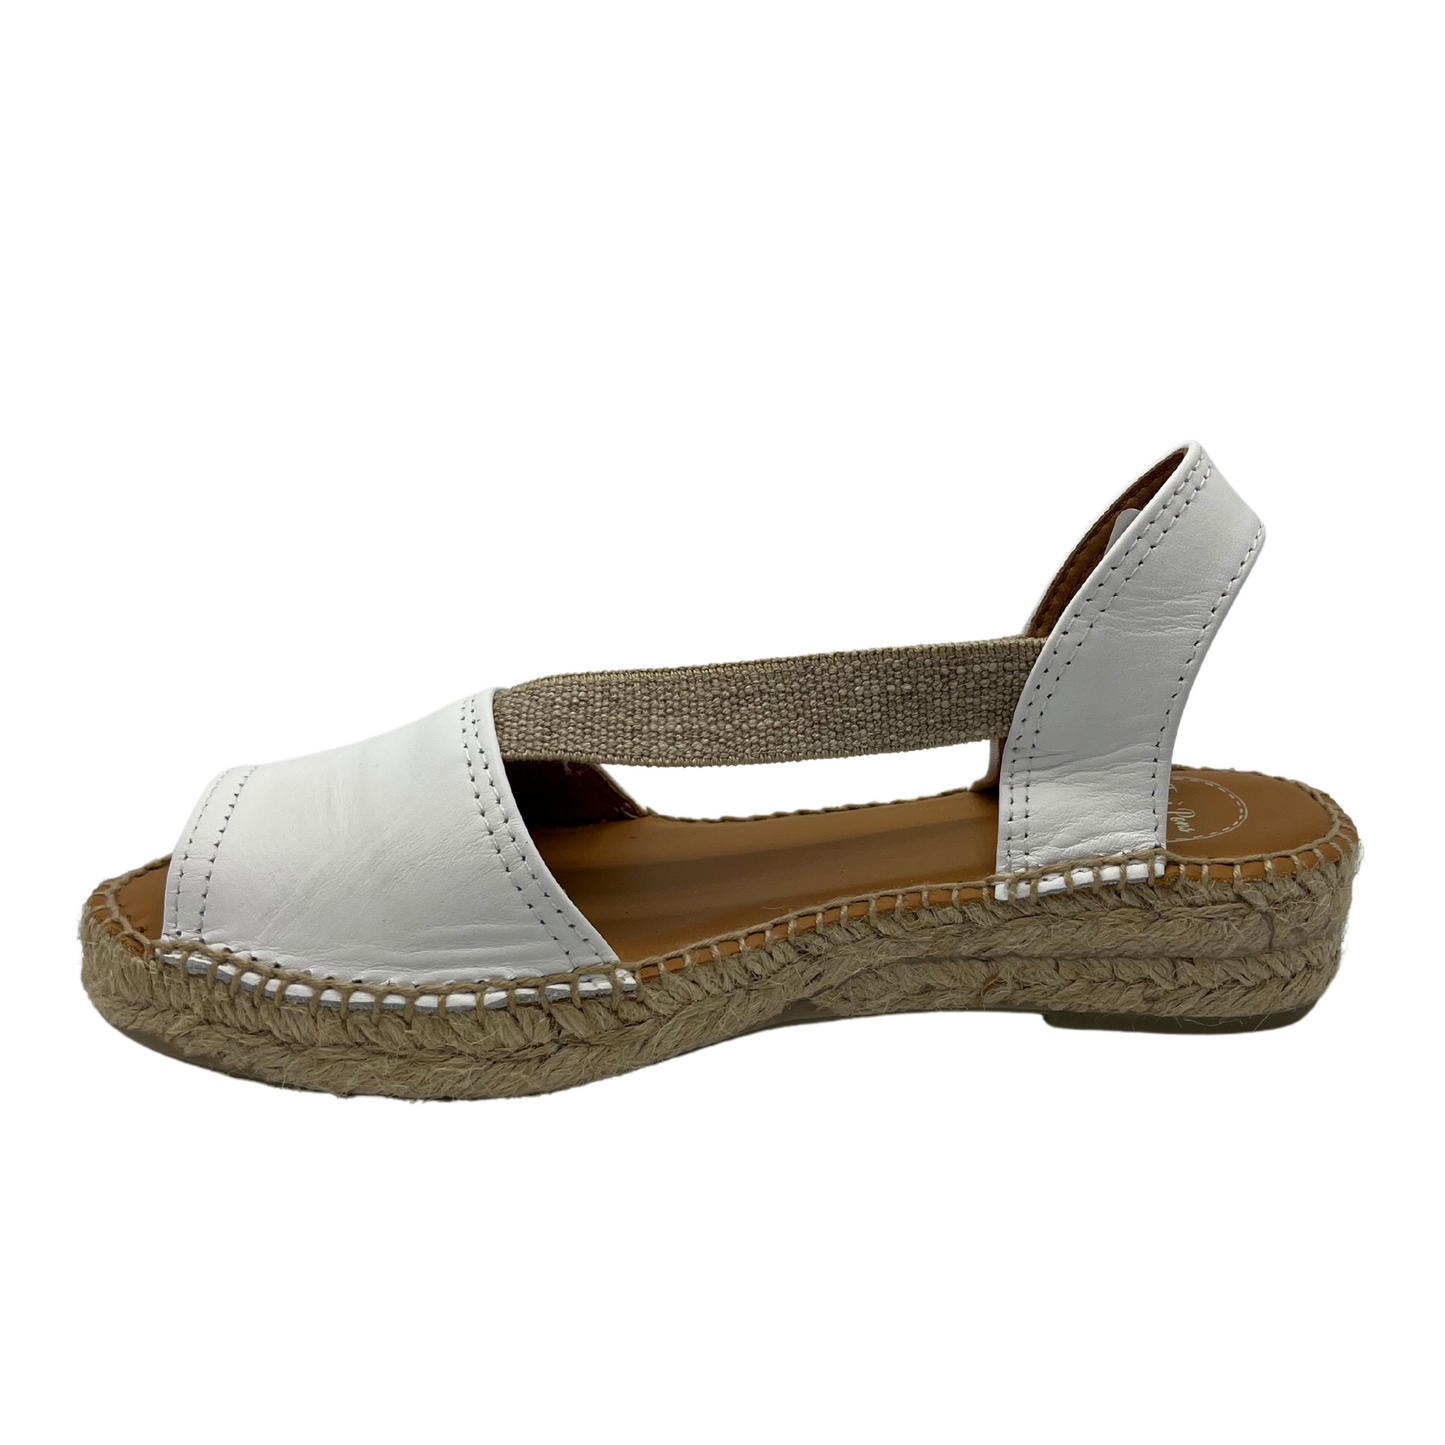 Left facing view of white leather sandal with brown lining and rounded toe